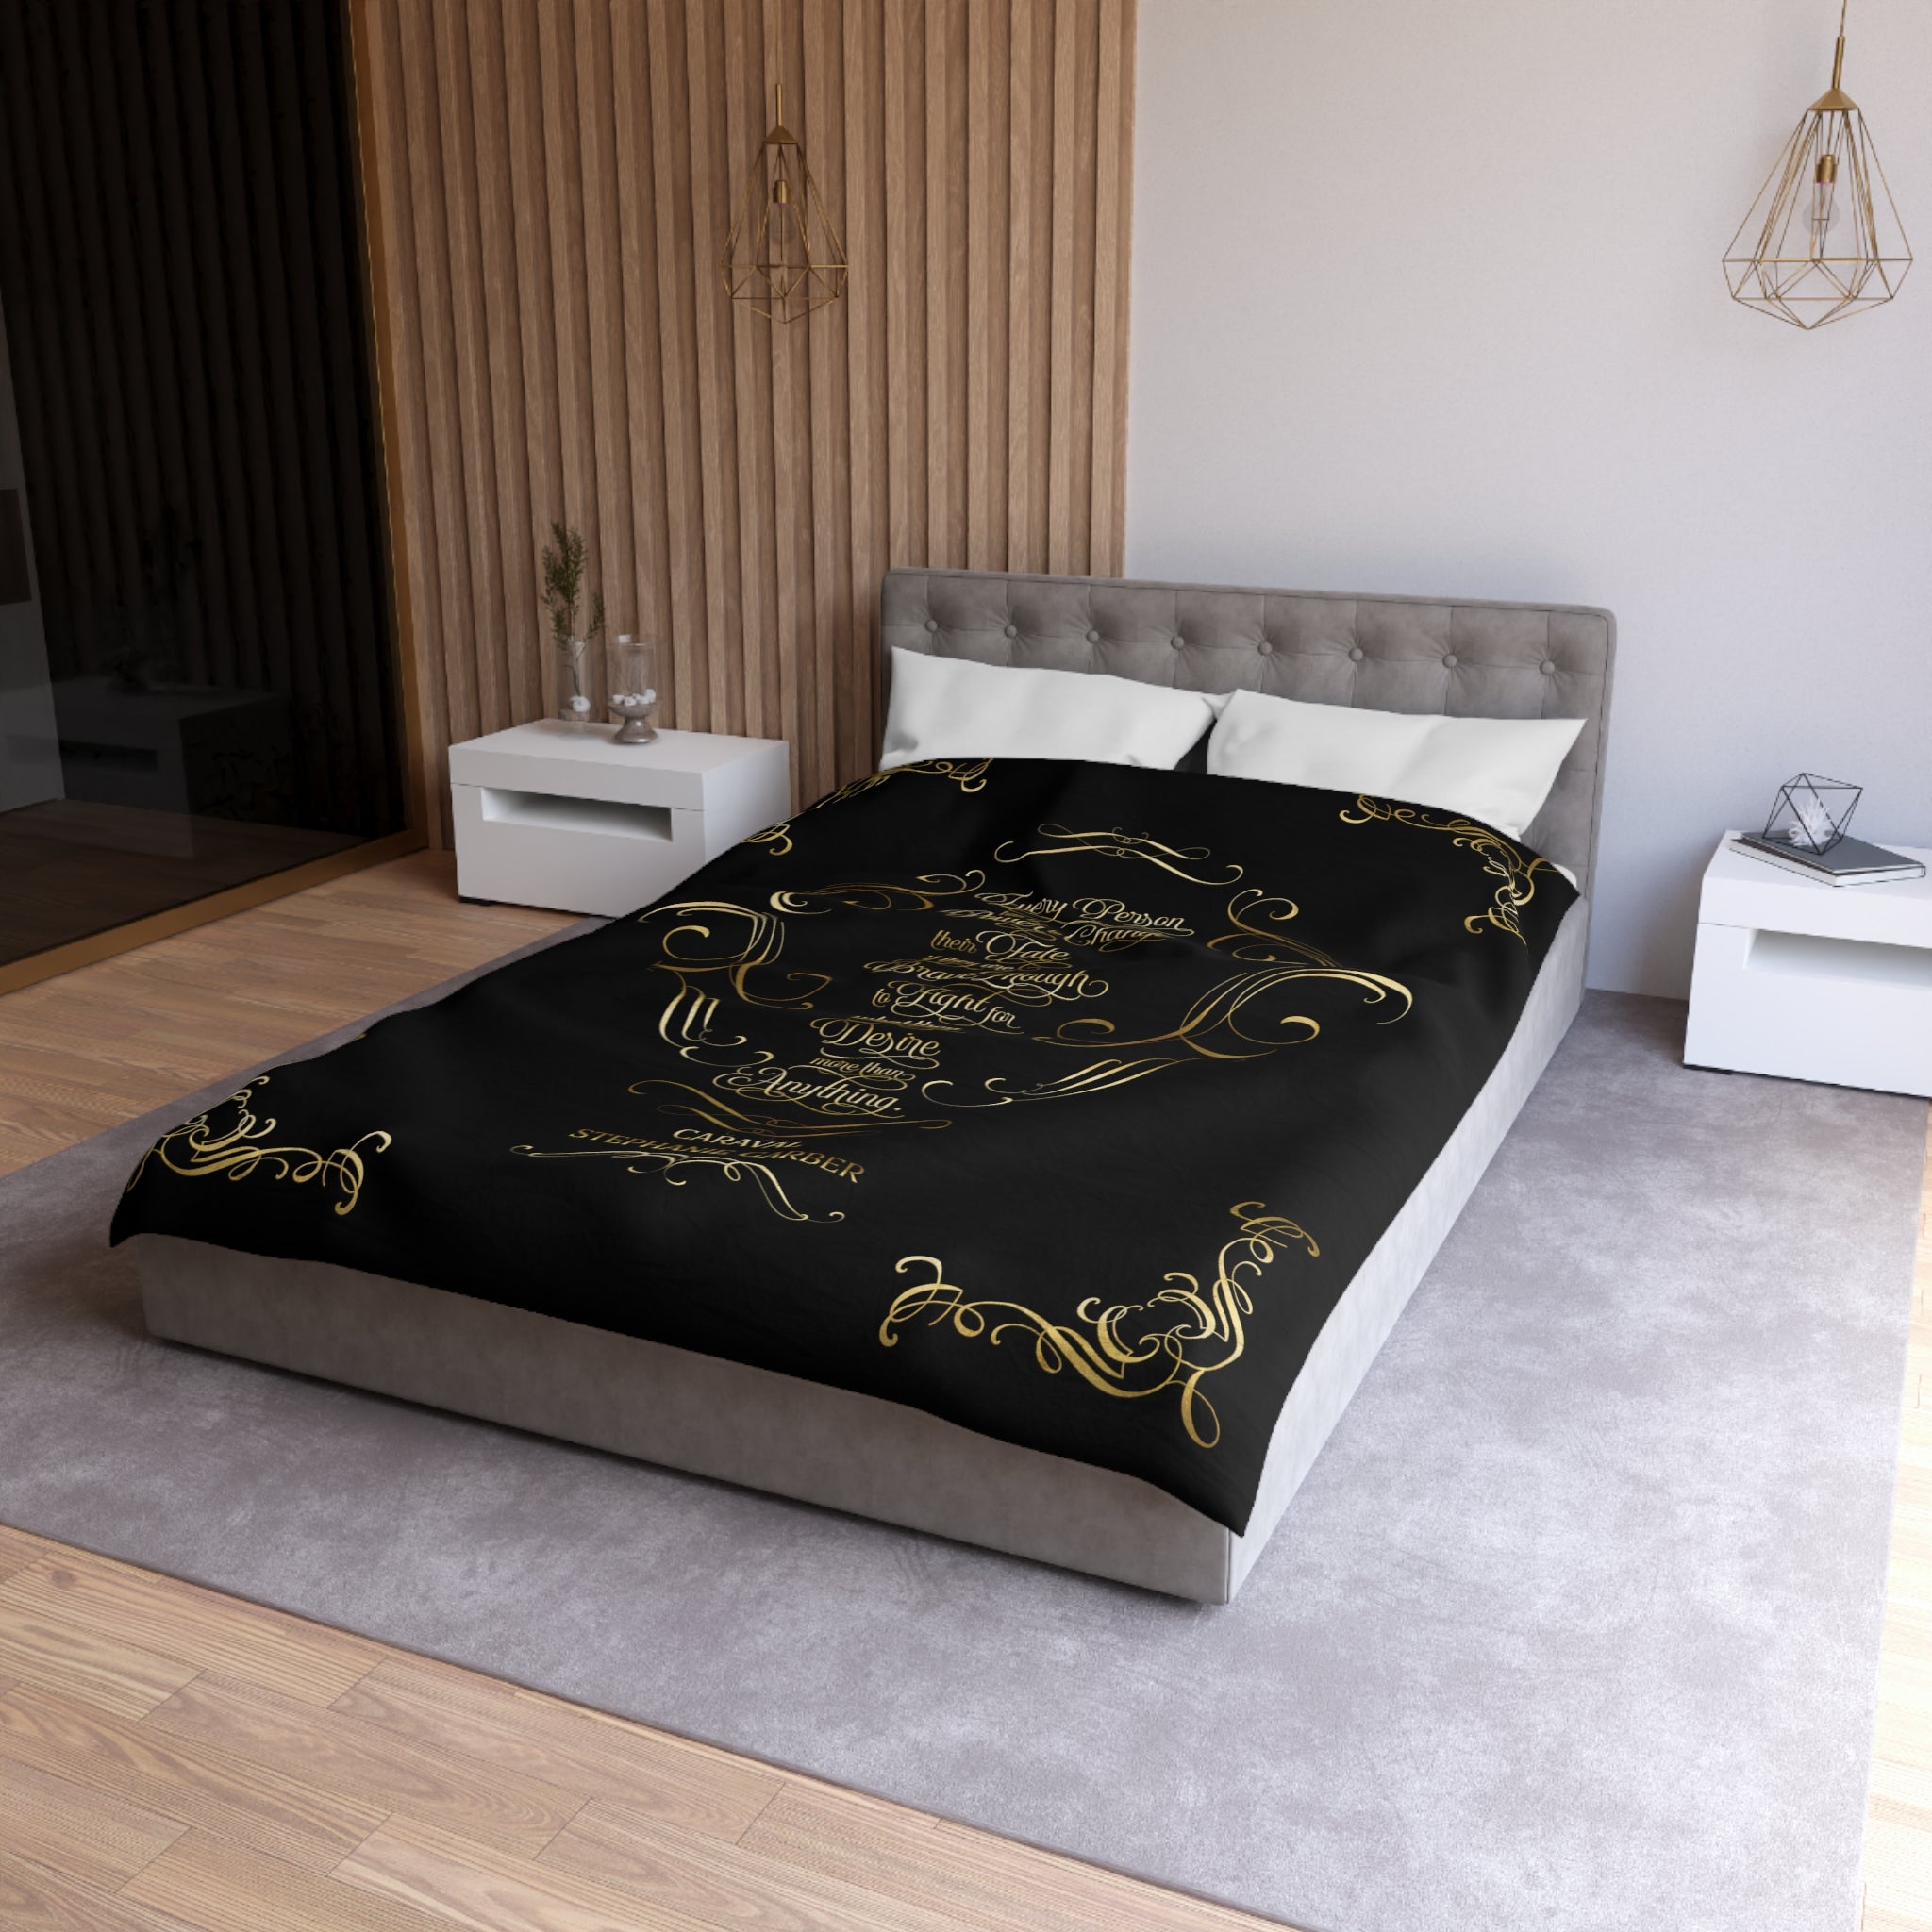 The Power to Change Fate. Caraval Duvet Cover